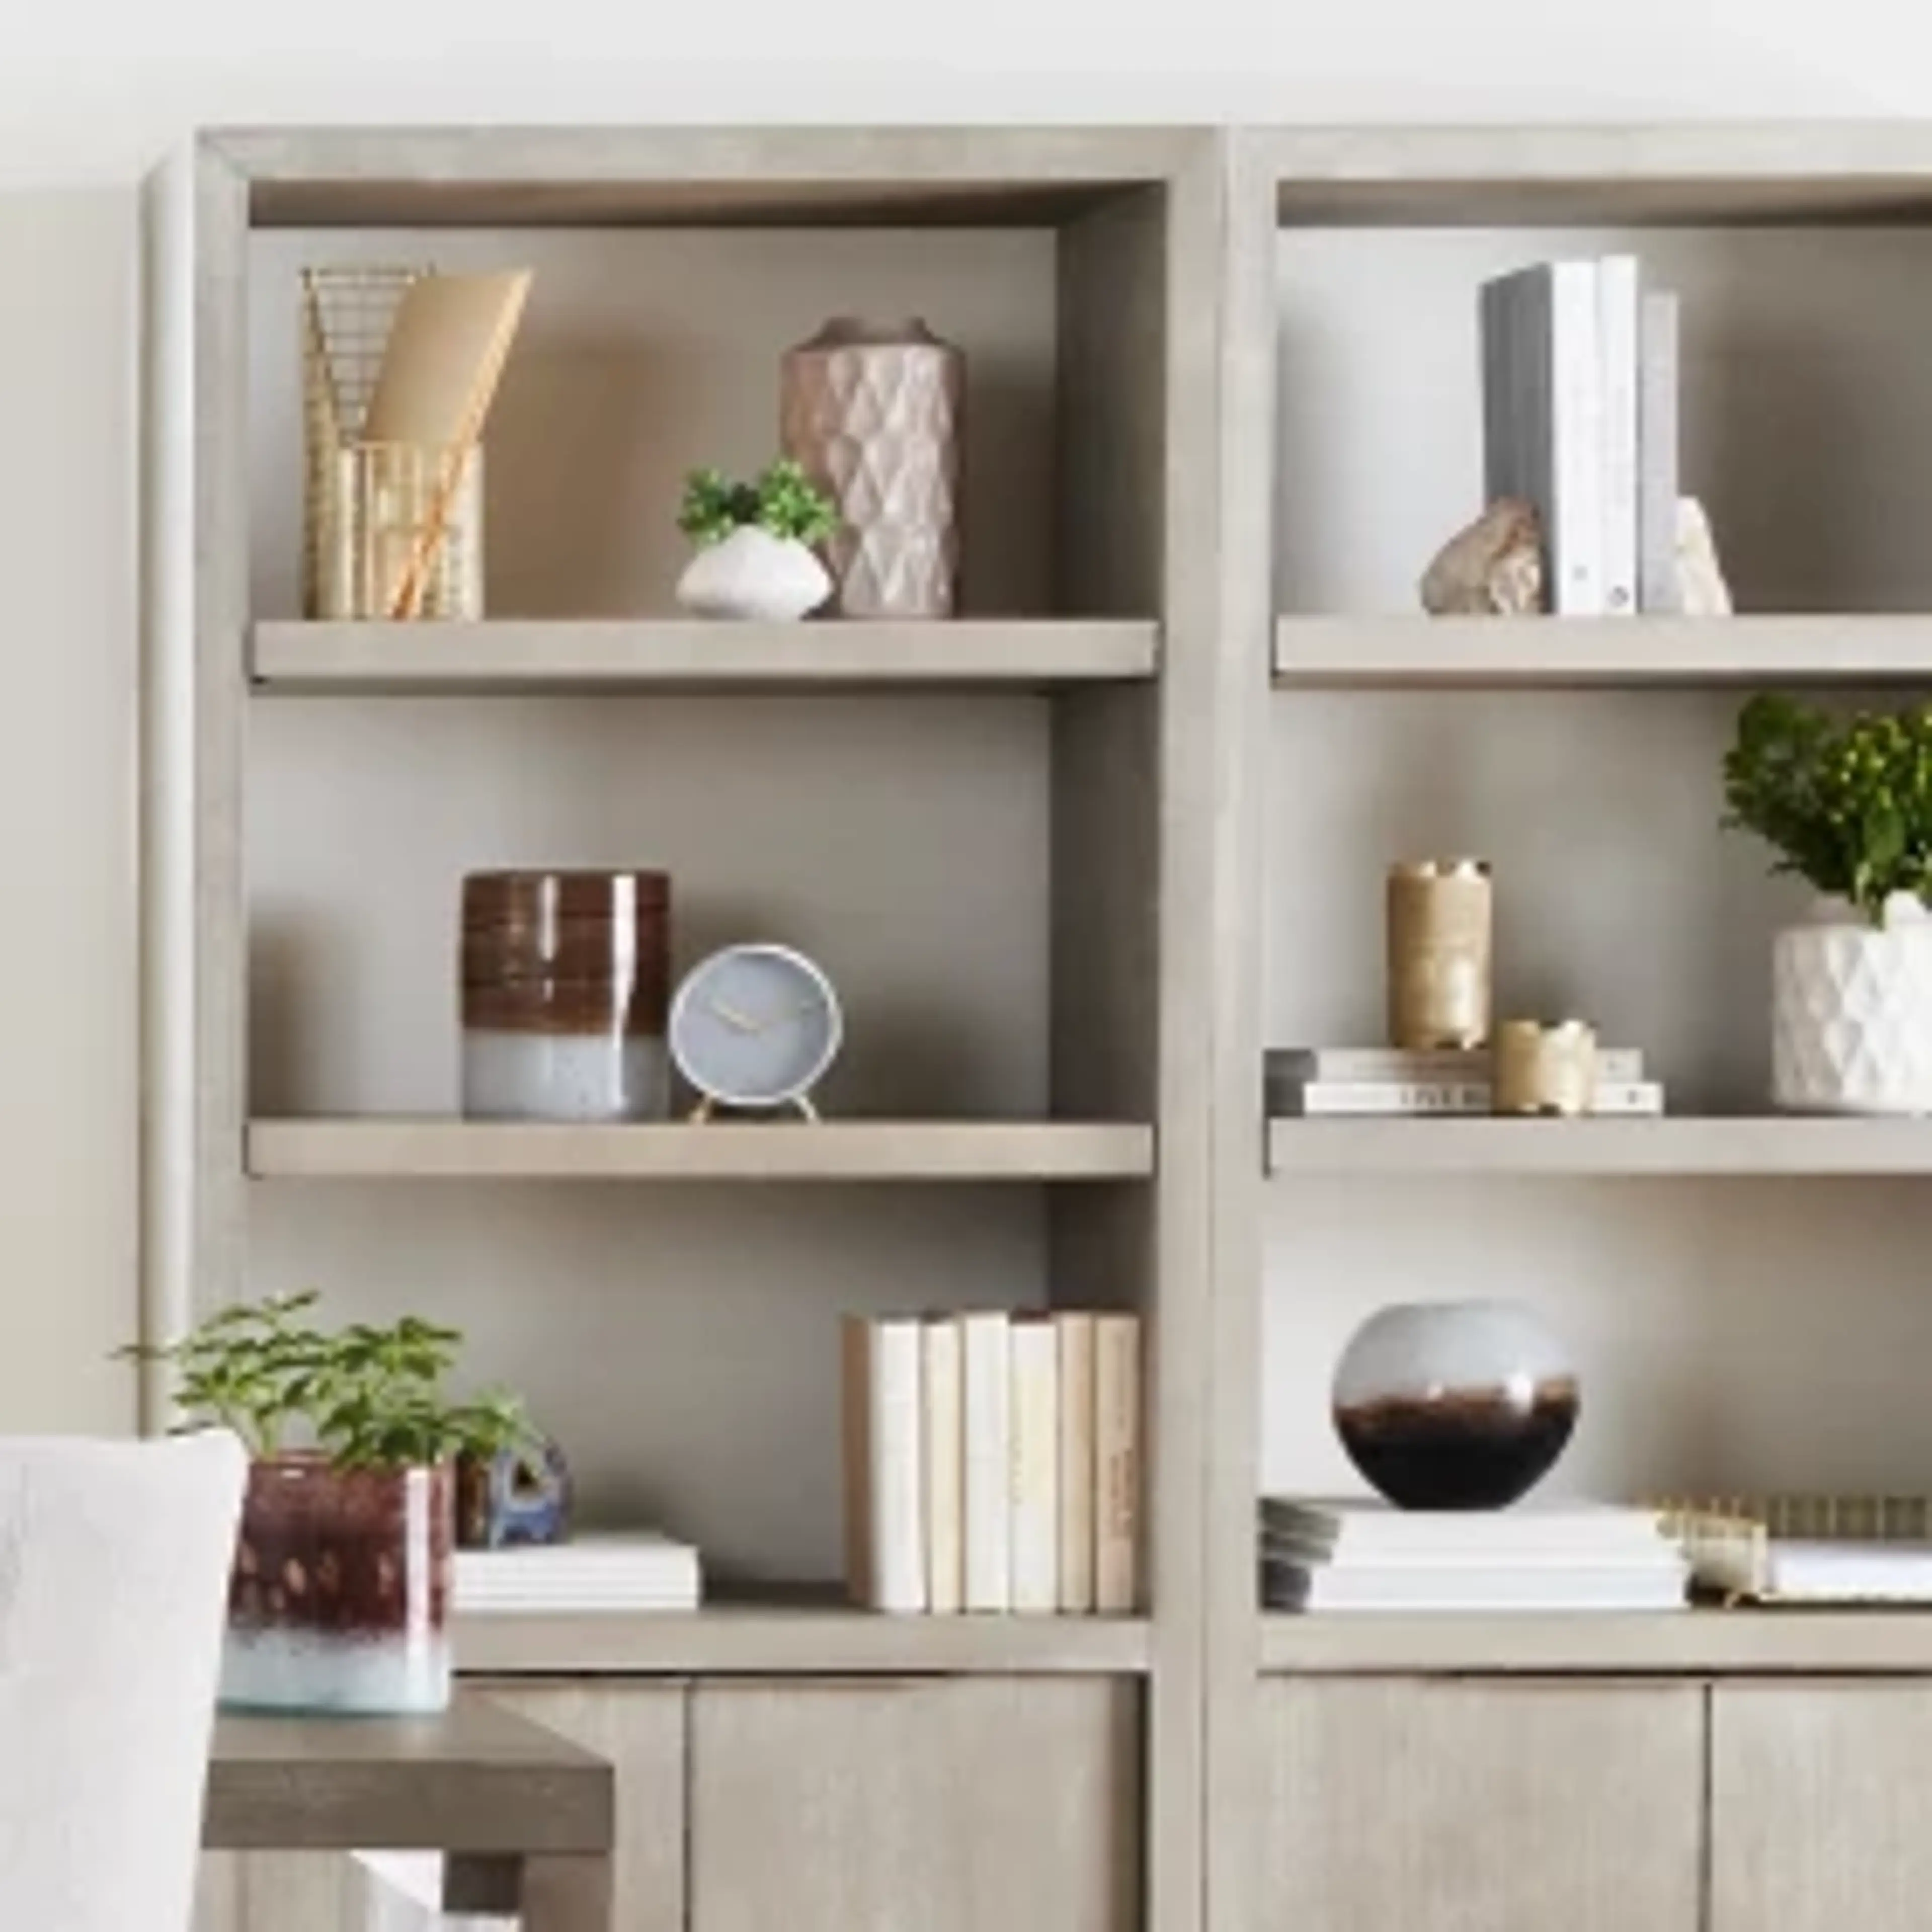 Bookshelf Ideas to Create a Designer-Look for Your Home   